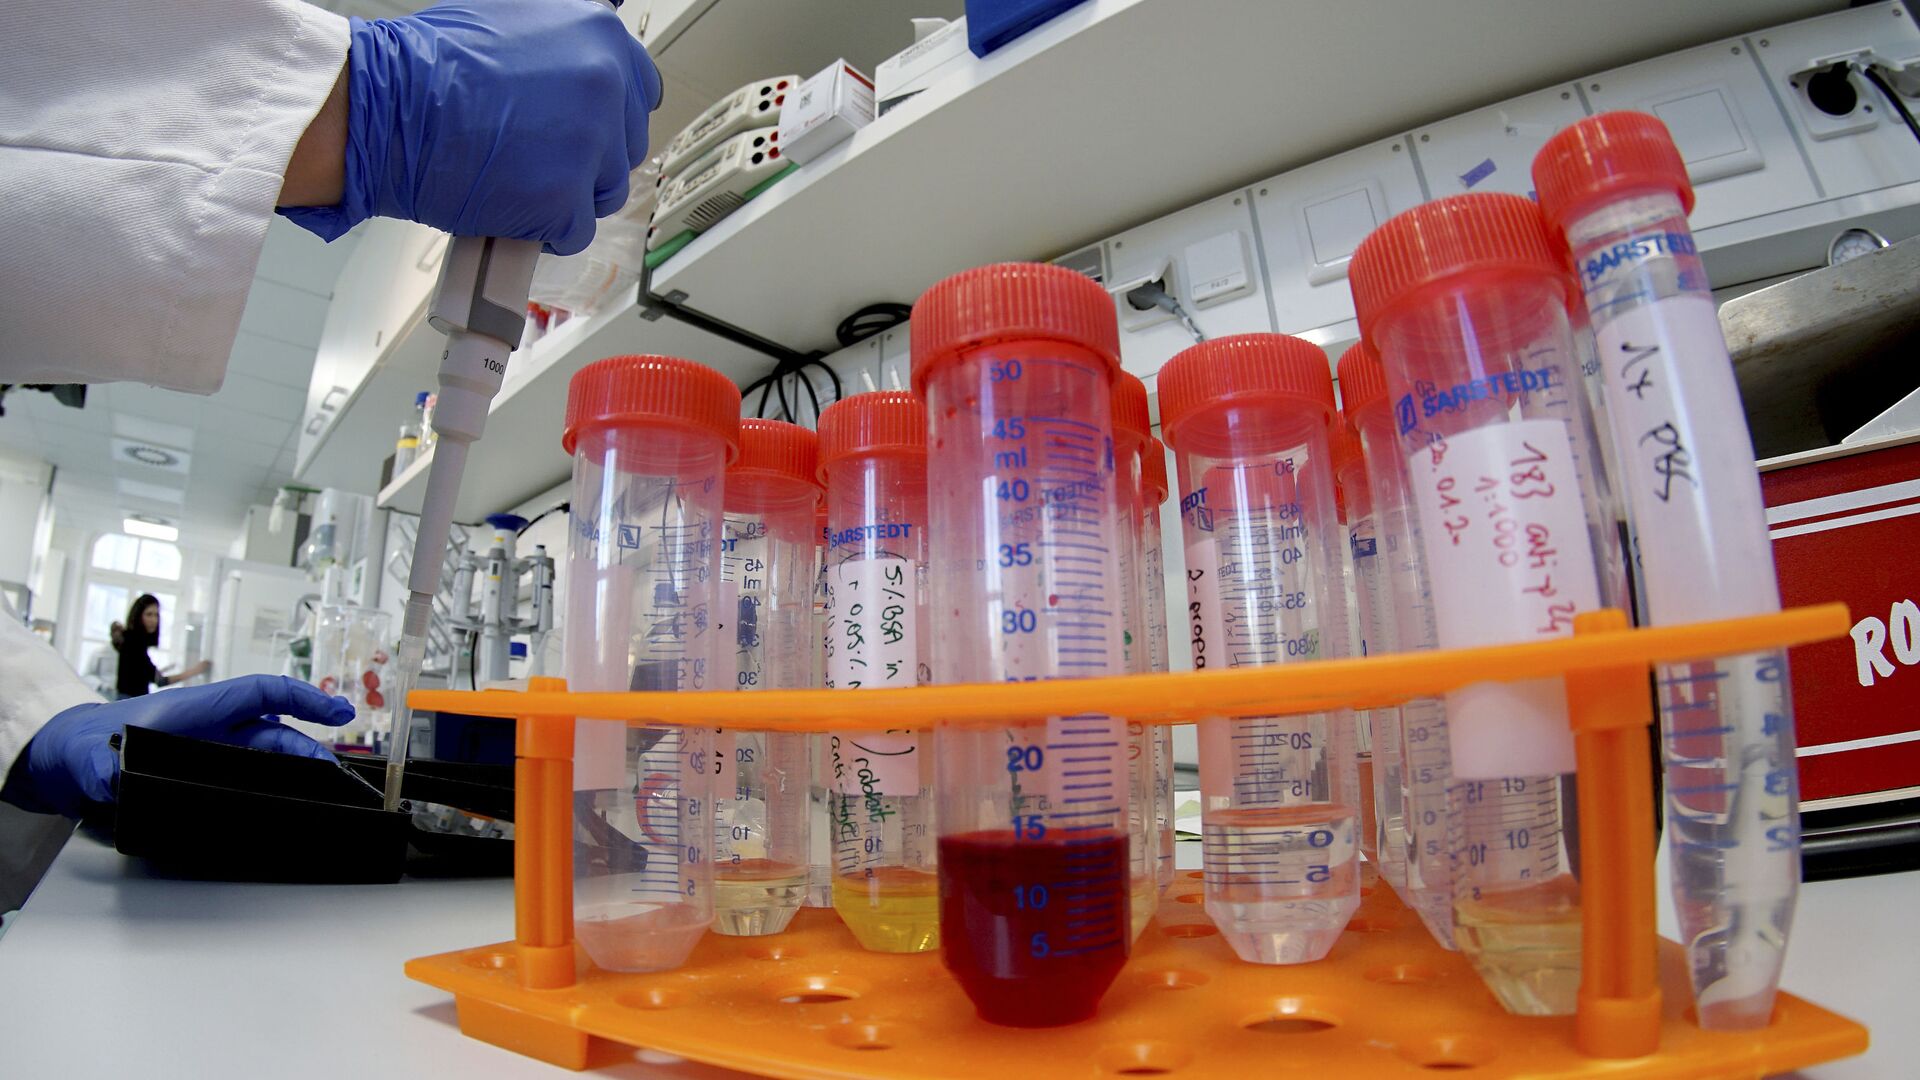 A lab assistant works on samples after an AP interview with Christian Drosten, director of the institute for virology of Berlin's Charite hospital on his researches on the coronavirus in Berlin, Germany, Tuesday, Jan. 21, 2020 - Sputnik Moldova-România, 1920, 26.05.2021